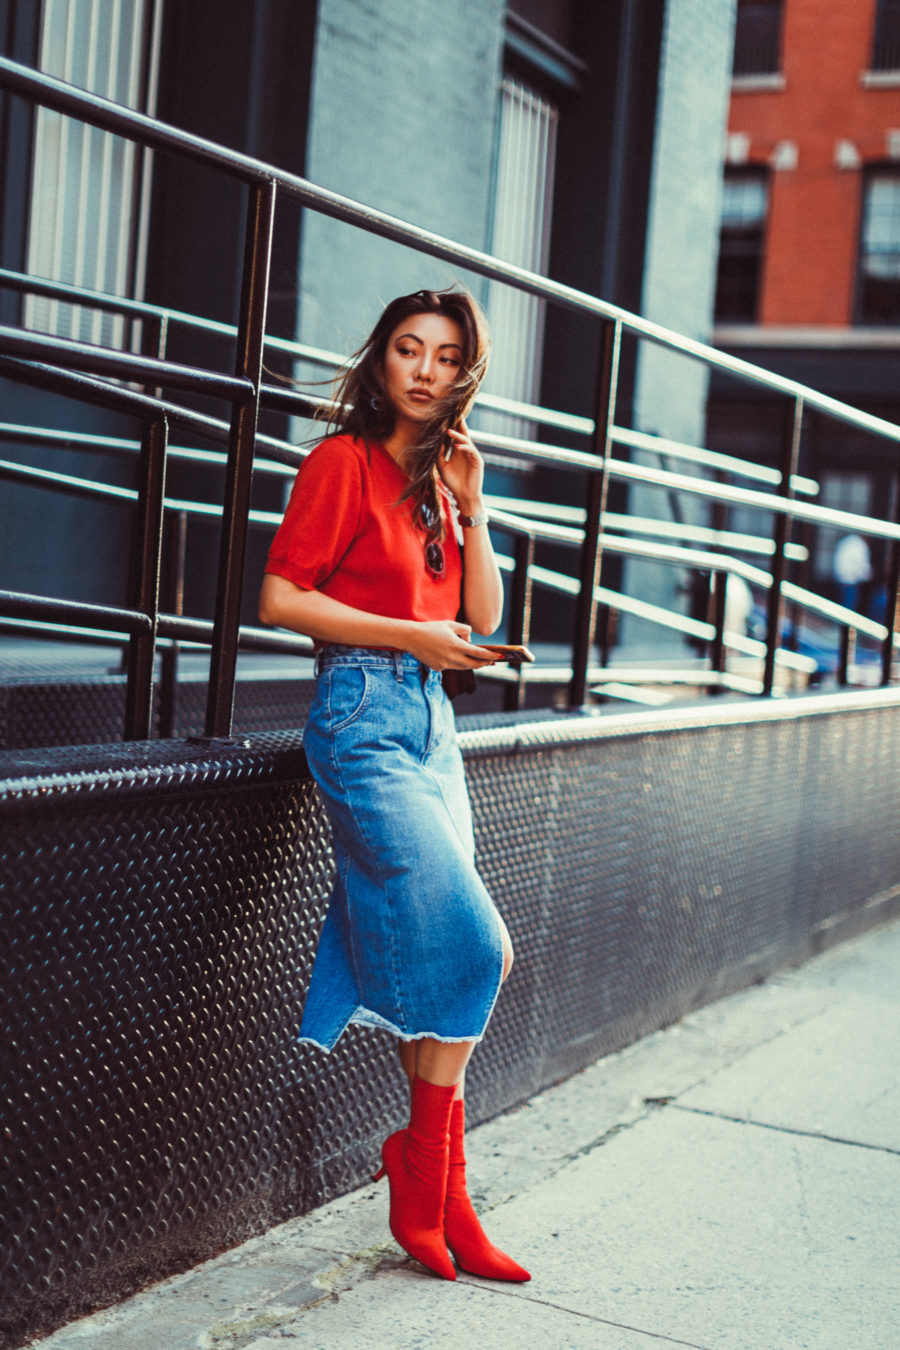 fashion blogger jessica wang shares thanksgiving day outfit ideas and wears a midi denim skirt with red boots and a red tee // Notjessfashion.com